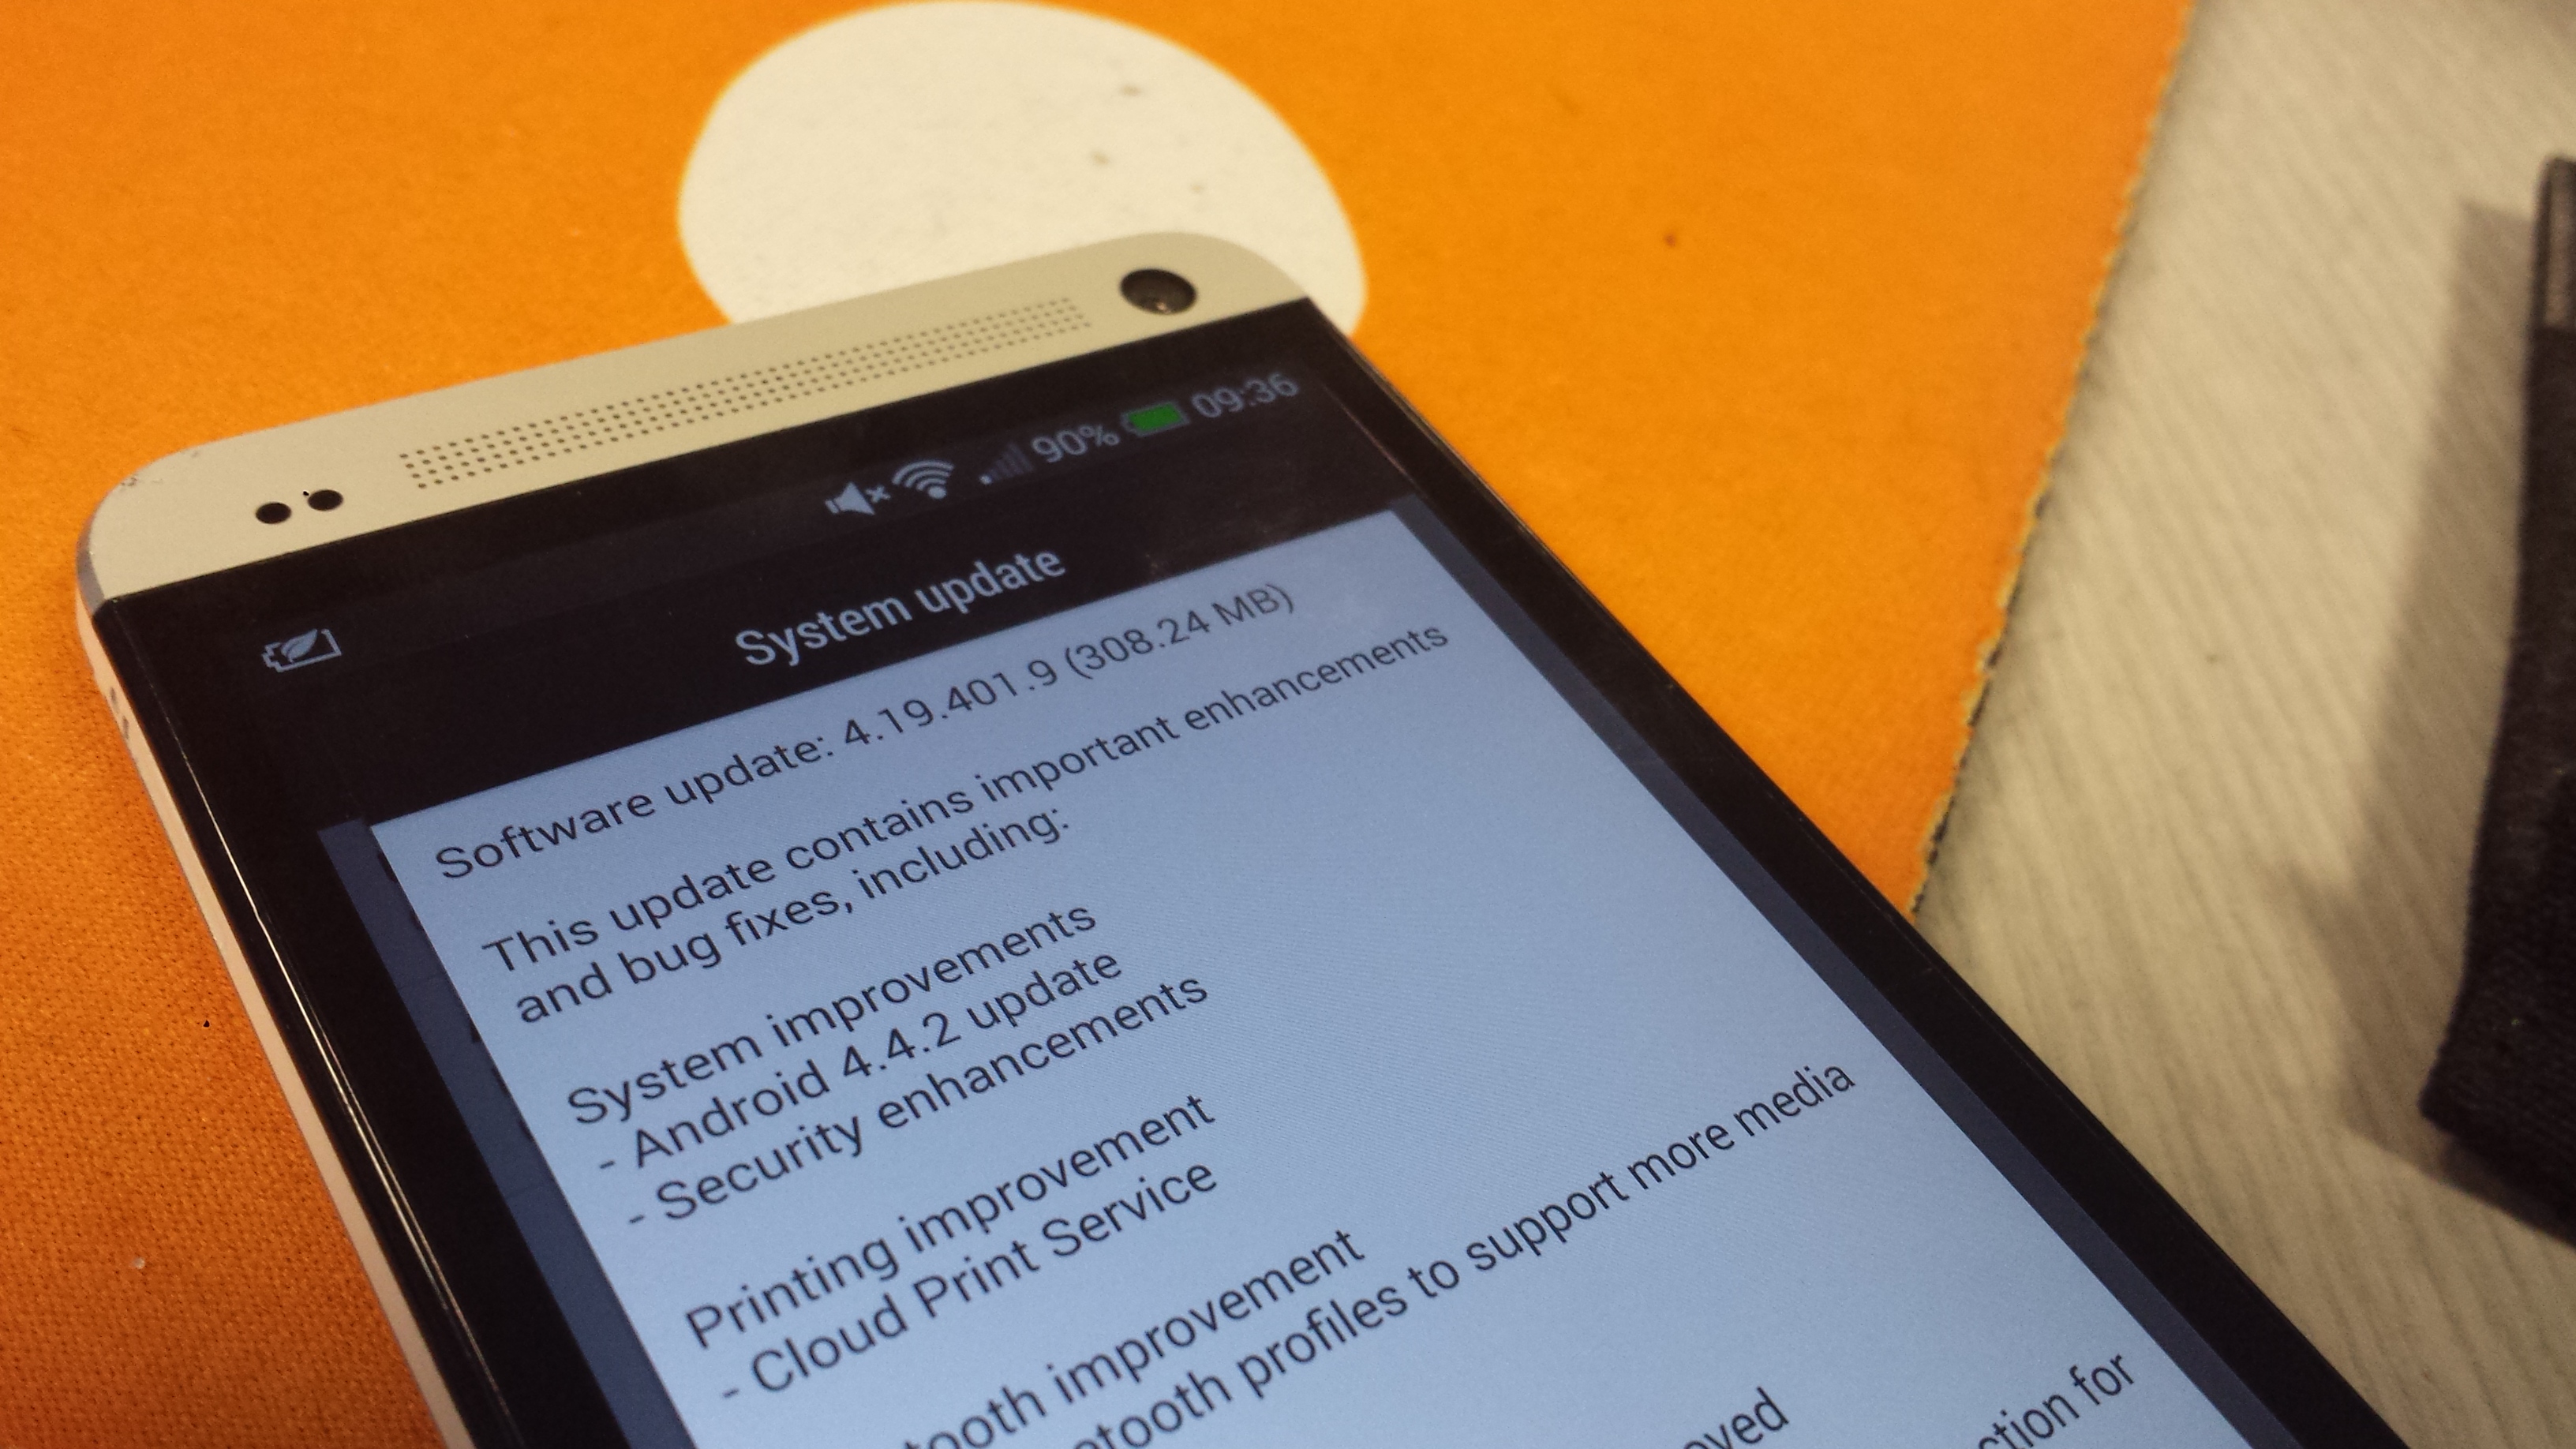 Hands on with Android 4.4 KitKat for the HTC One